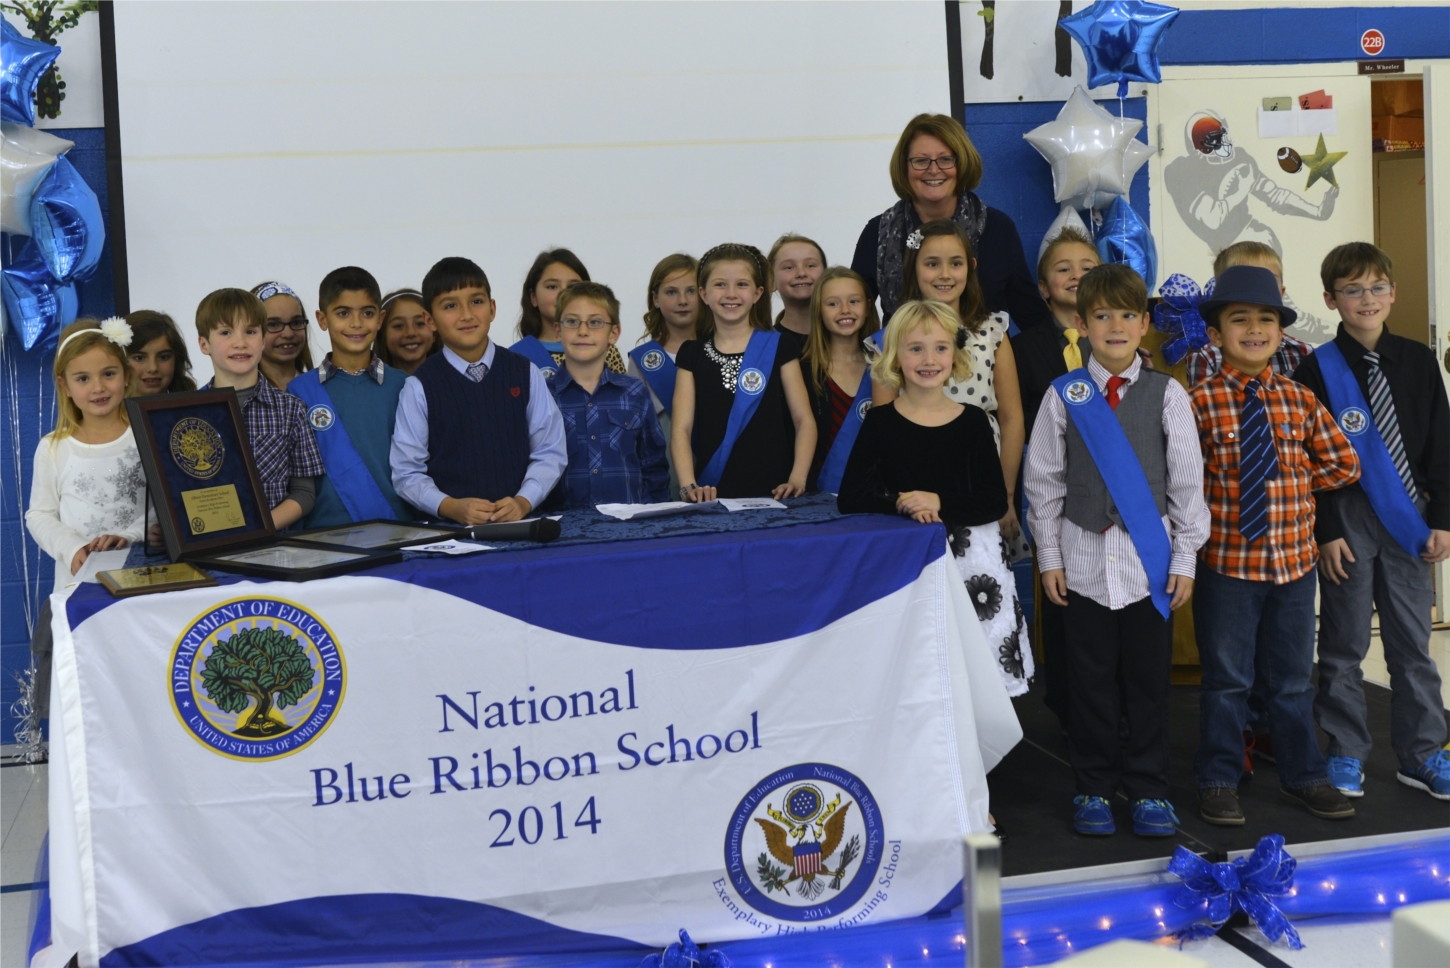 Albion Elementary is a National Blue Ribbon School!